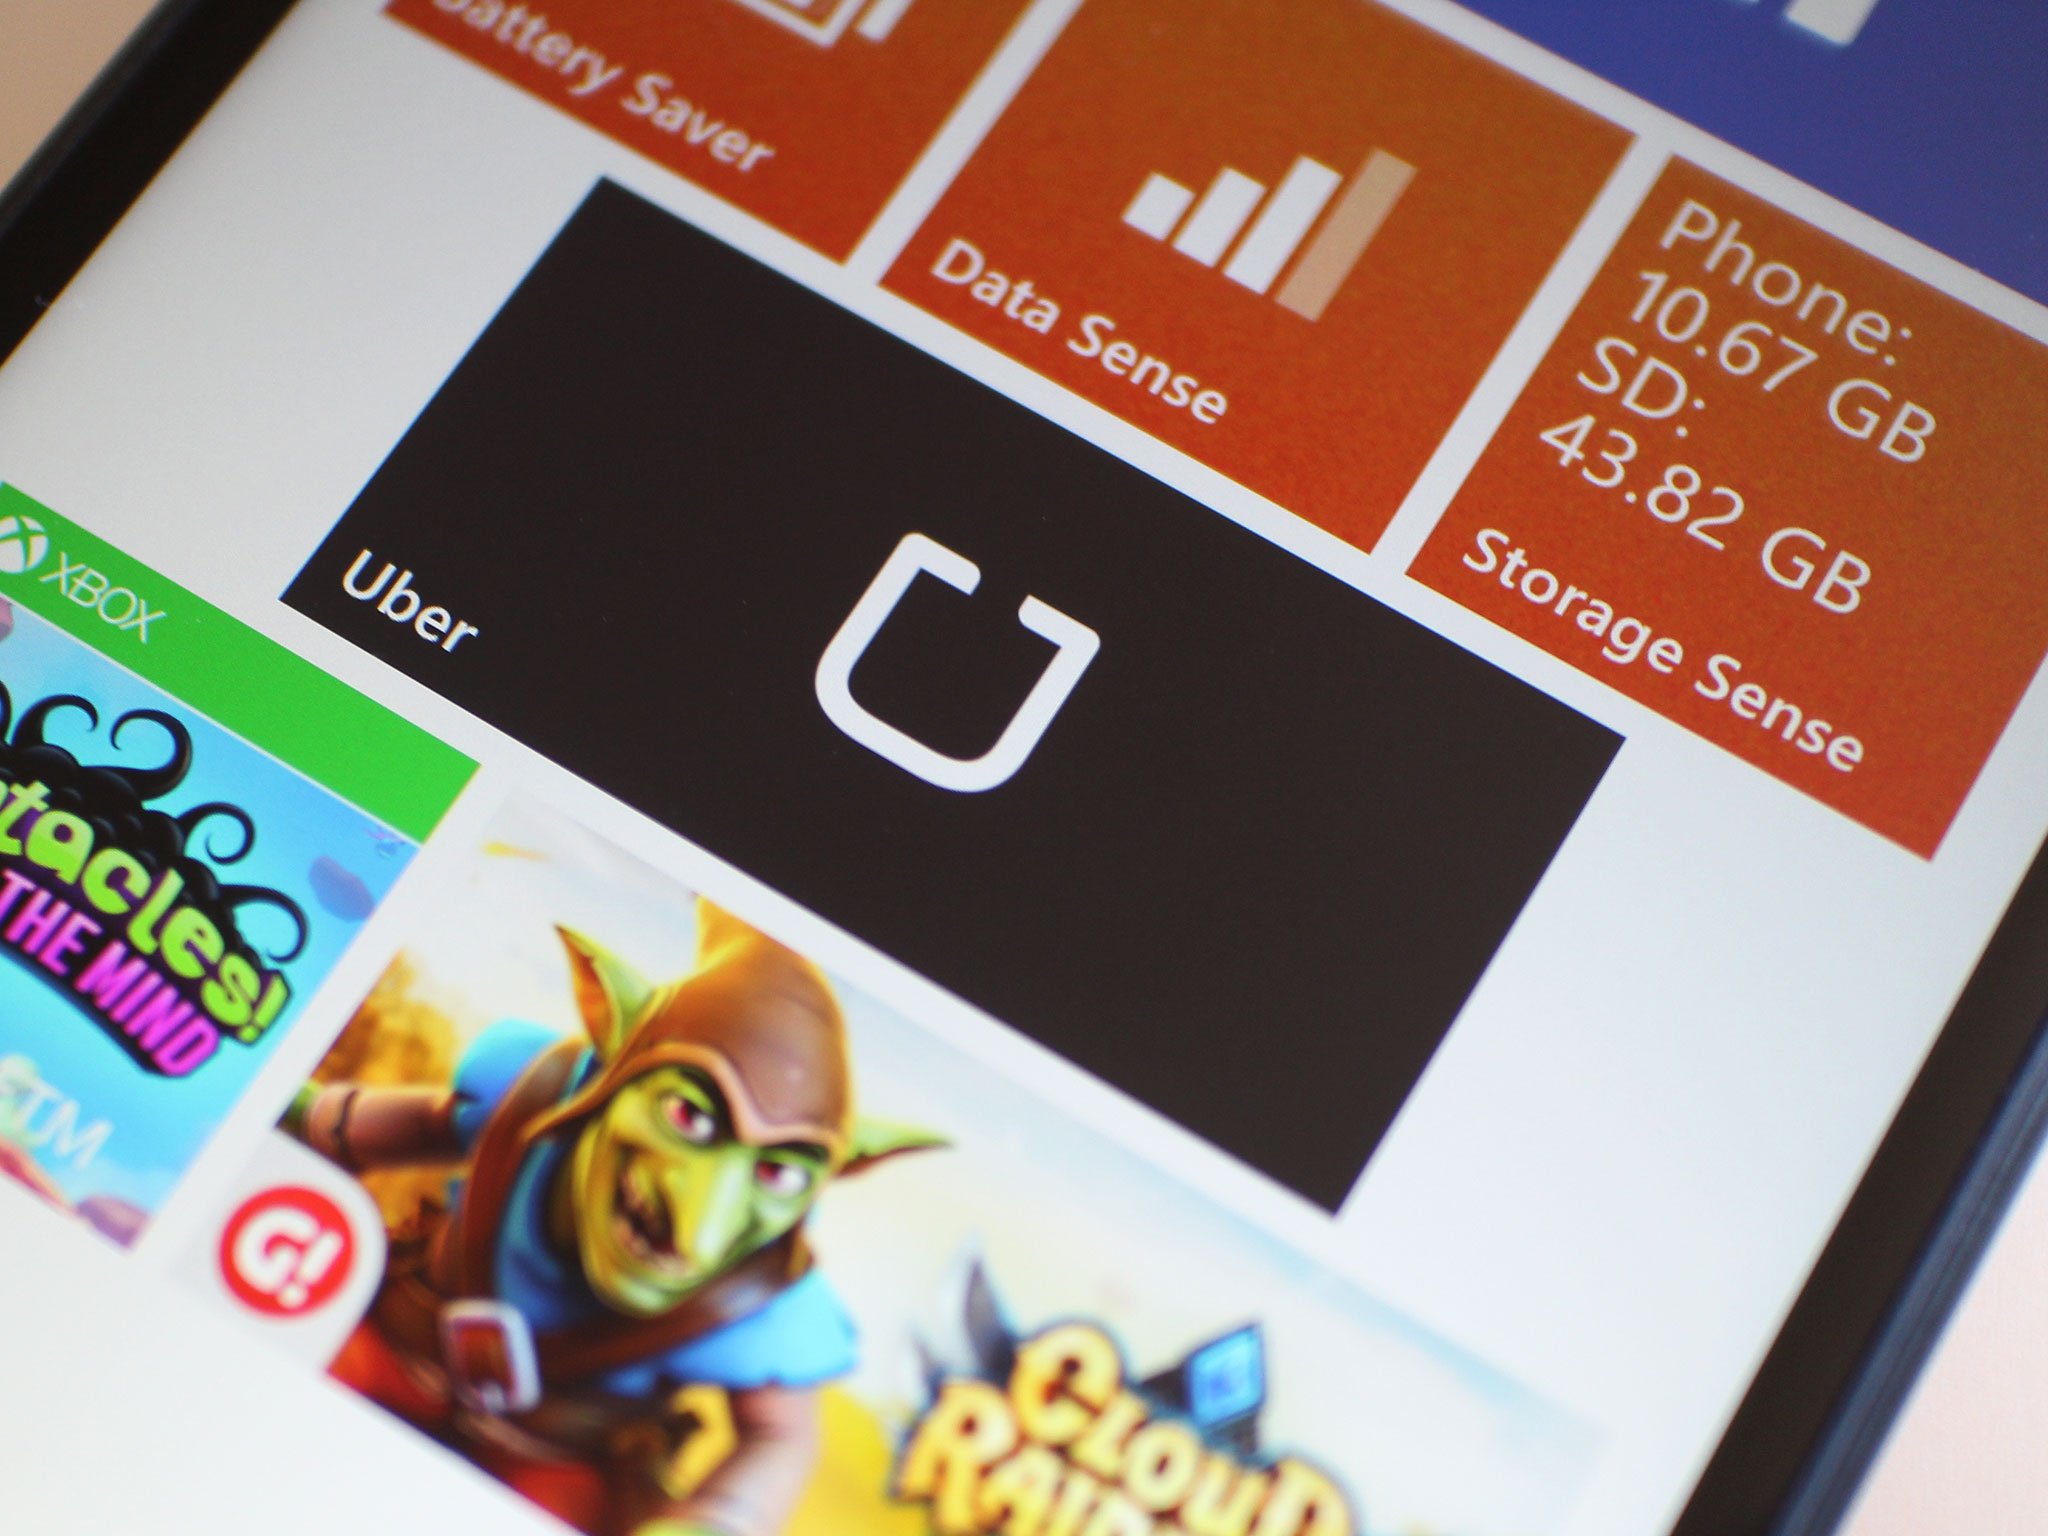 Uber for Windows Phone updated with performance improvements | Windows Central1200 x 900